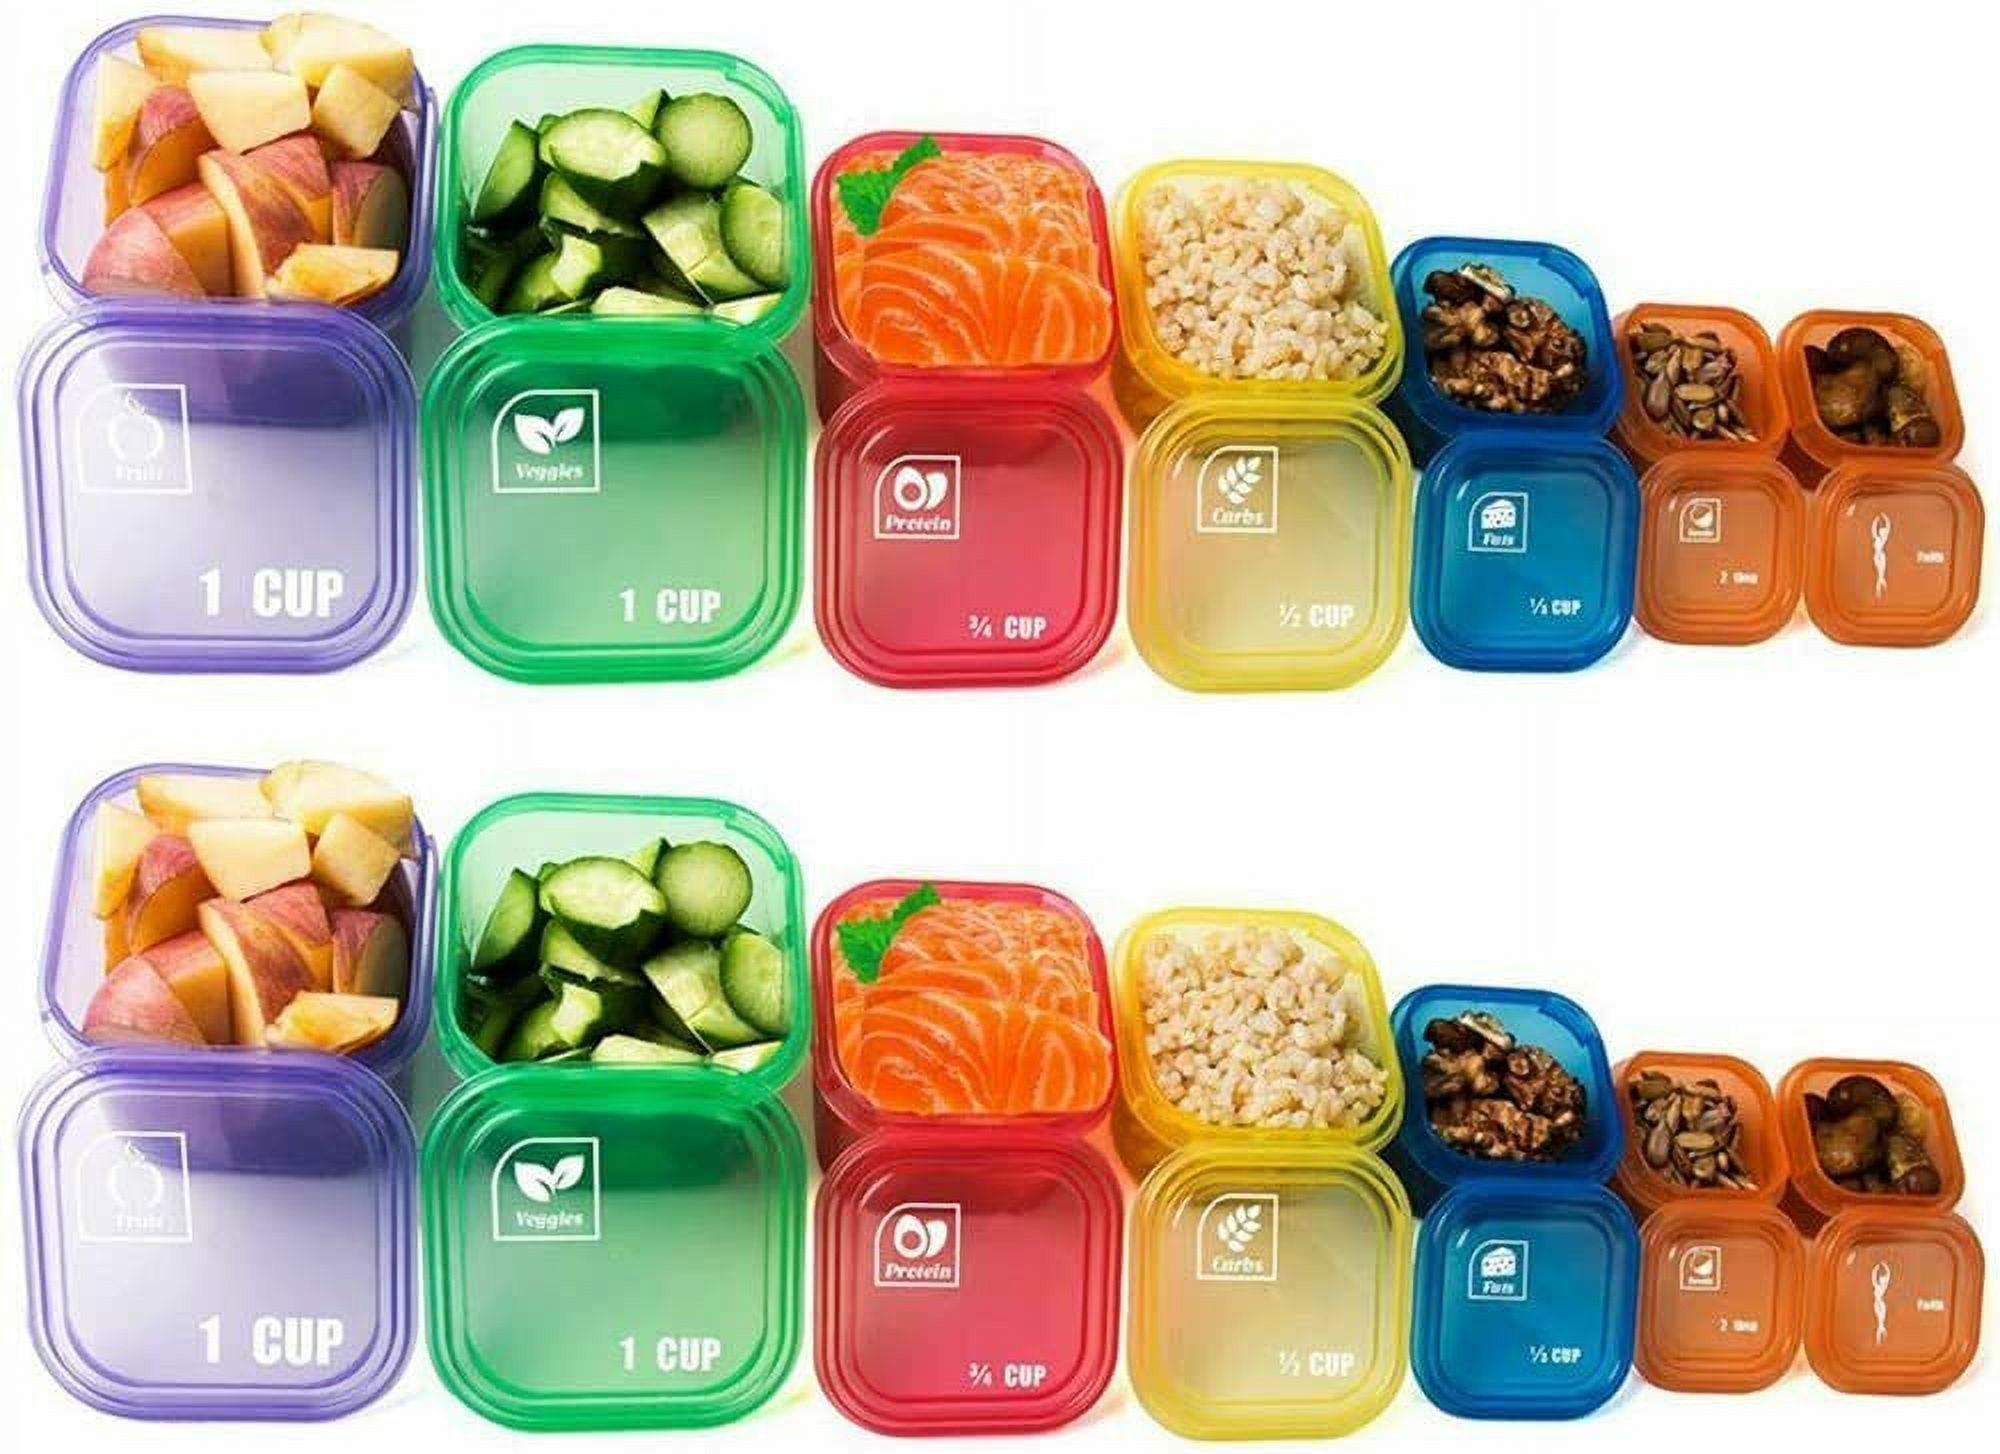 Portion Control Containers Color Coded Labeled 21 Day Lose Weight